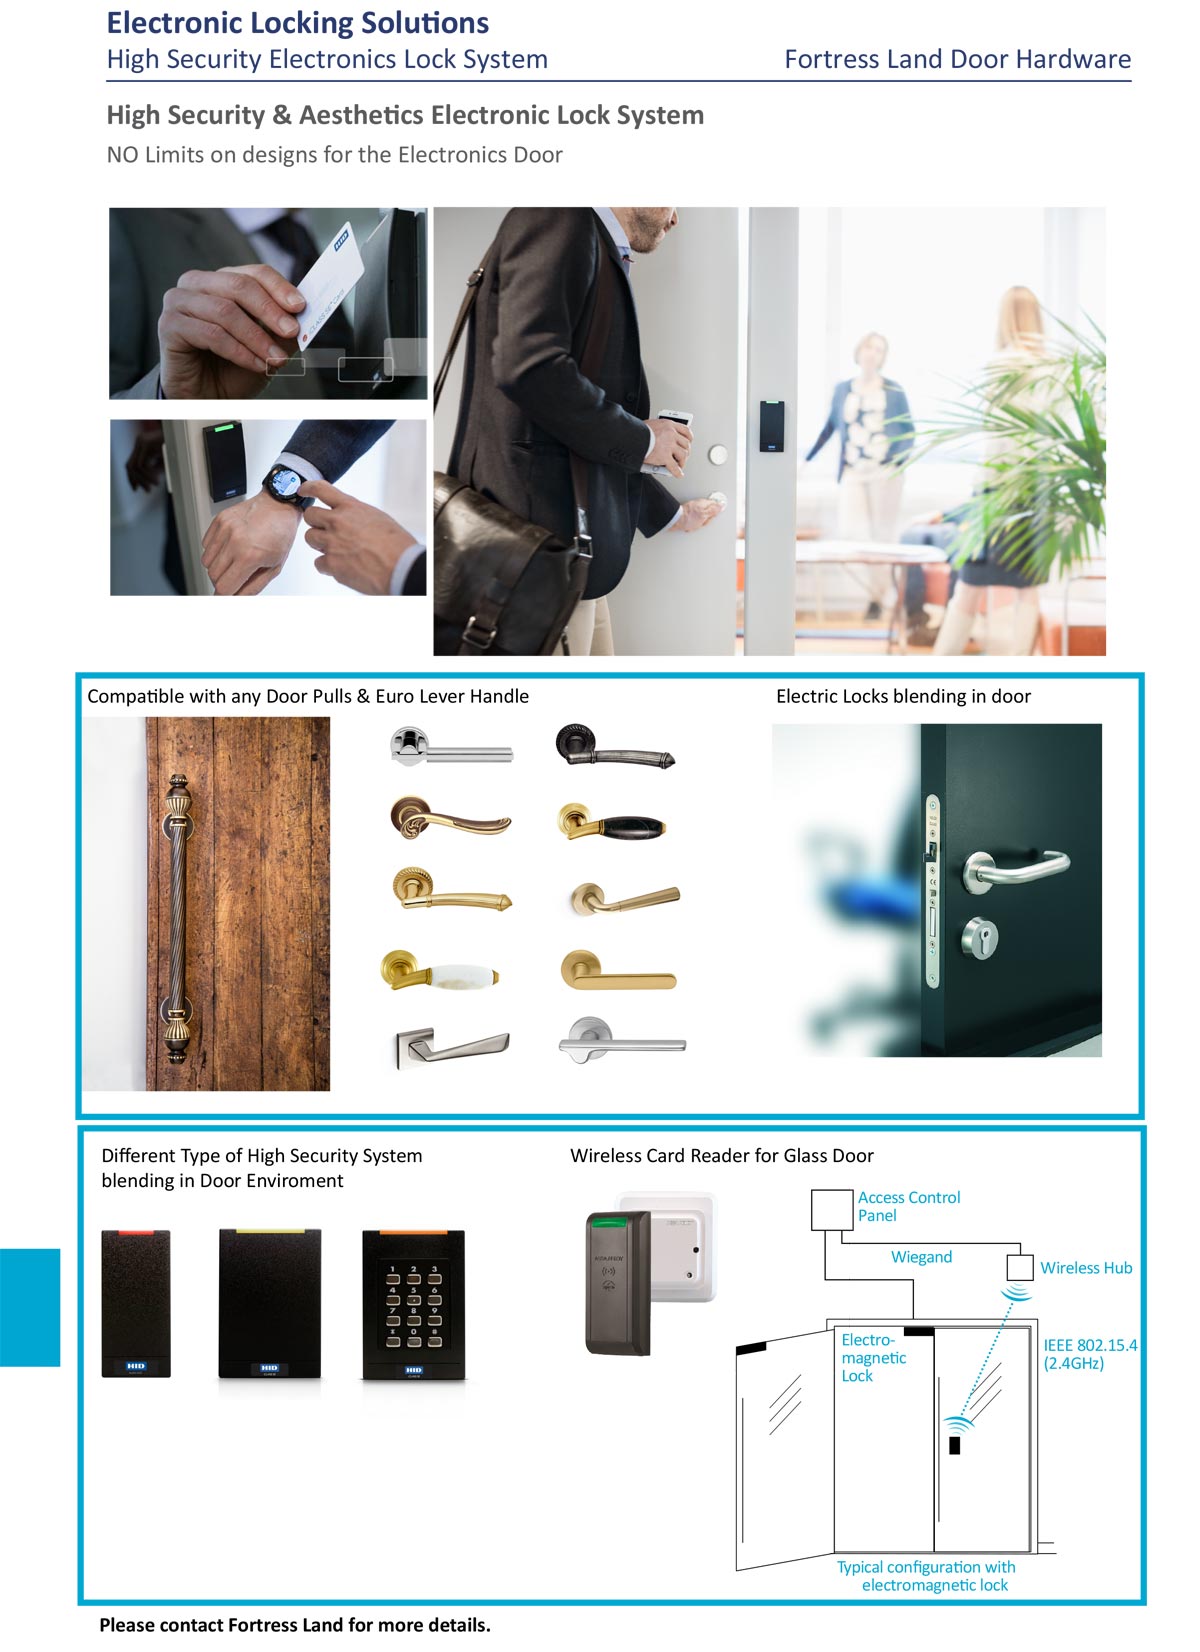 high security door access control system, high secuirty door system, mobile access door, motor lock, assa abloy electric lock, Fortress Land Security Company Yangon, Myanmar